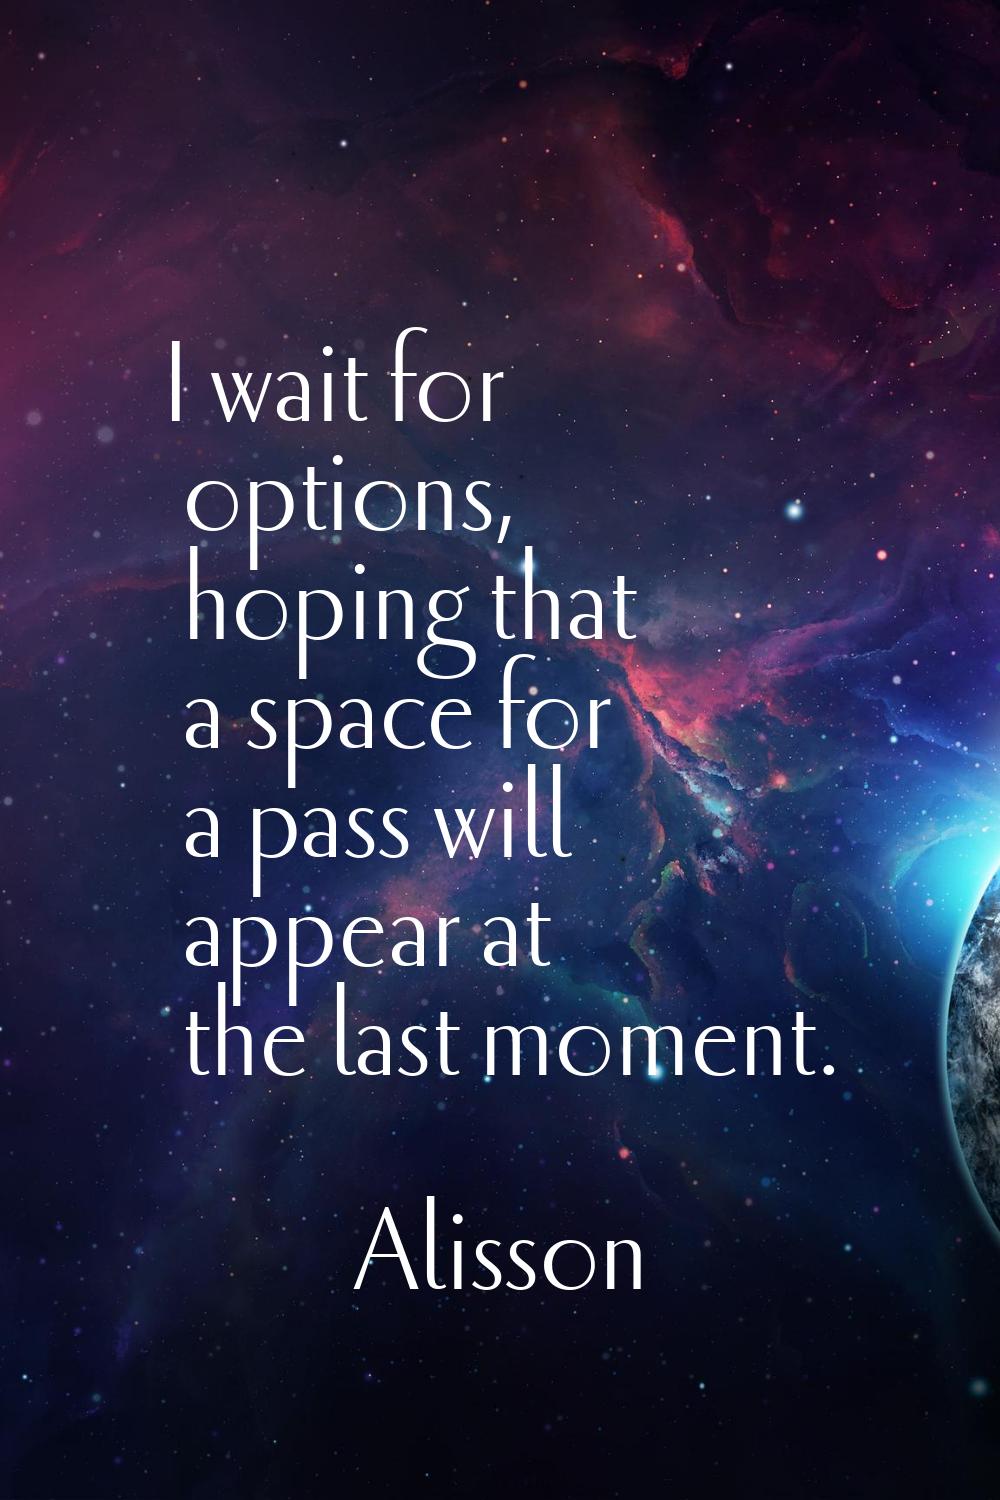 I wait for options, hoping that a space for a pass will appear at the last moment.